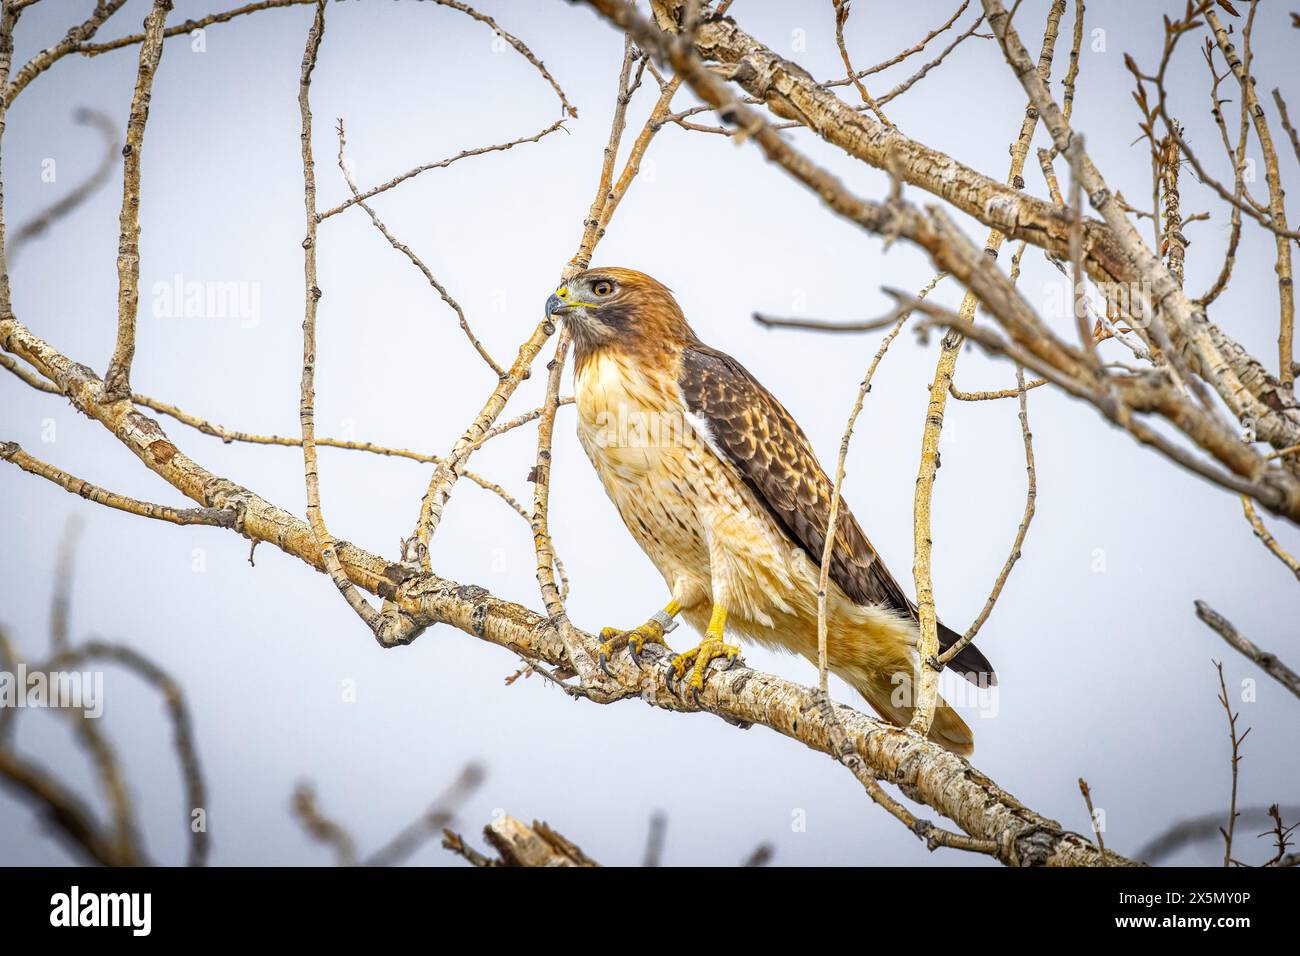 USA, Colorado, Fort Collins. Red-tailed hawk close-up in tree.. Stock Photo